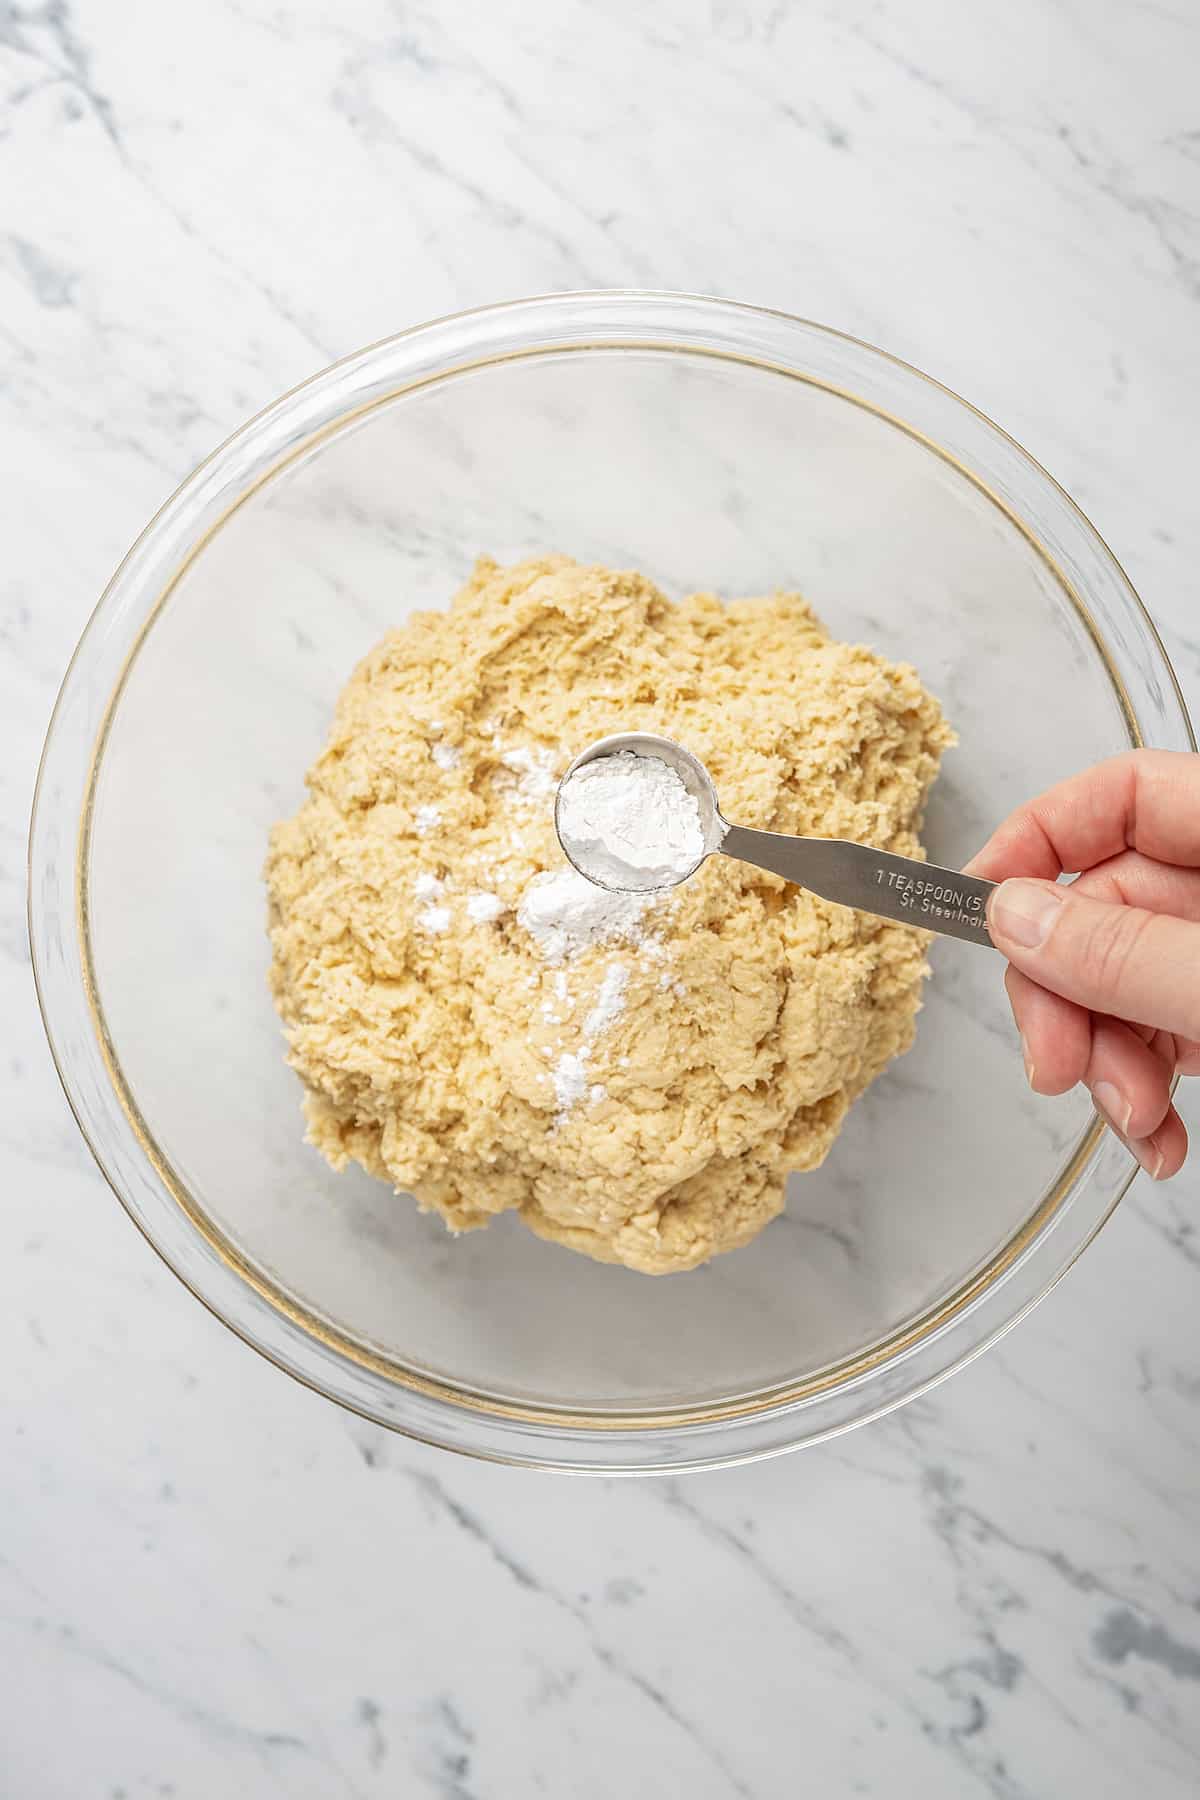 A hand holding a teaspoon sprinkles baking soda over proofed gluten-free bread dough in a glass bowl.